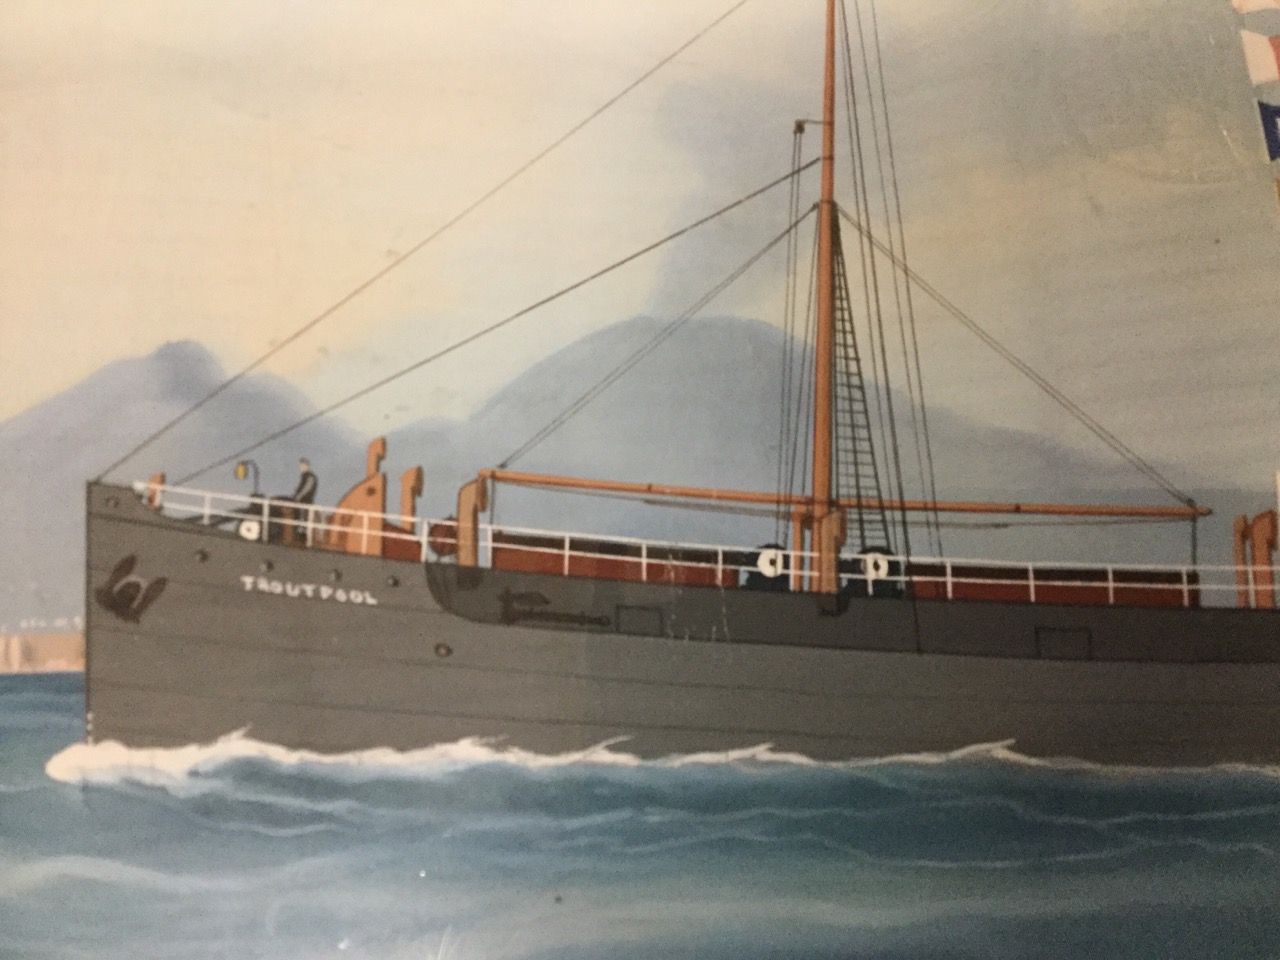 Watercolour & gouache, a study of Troutpool cargo ship under full steam, with figures on deck and - Bild 3 aus 3